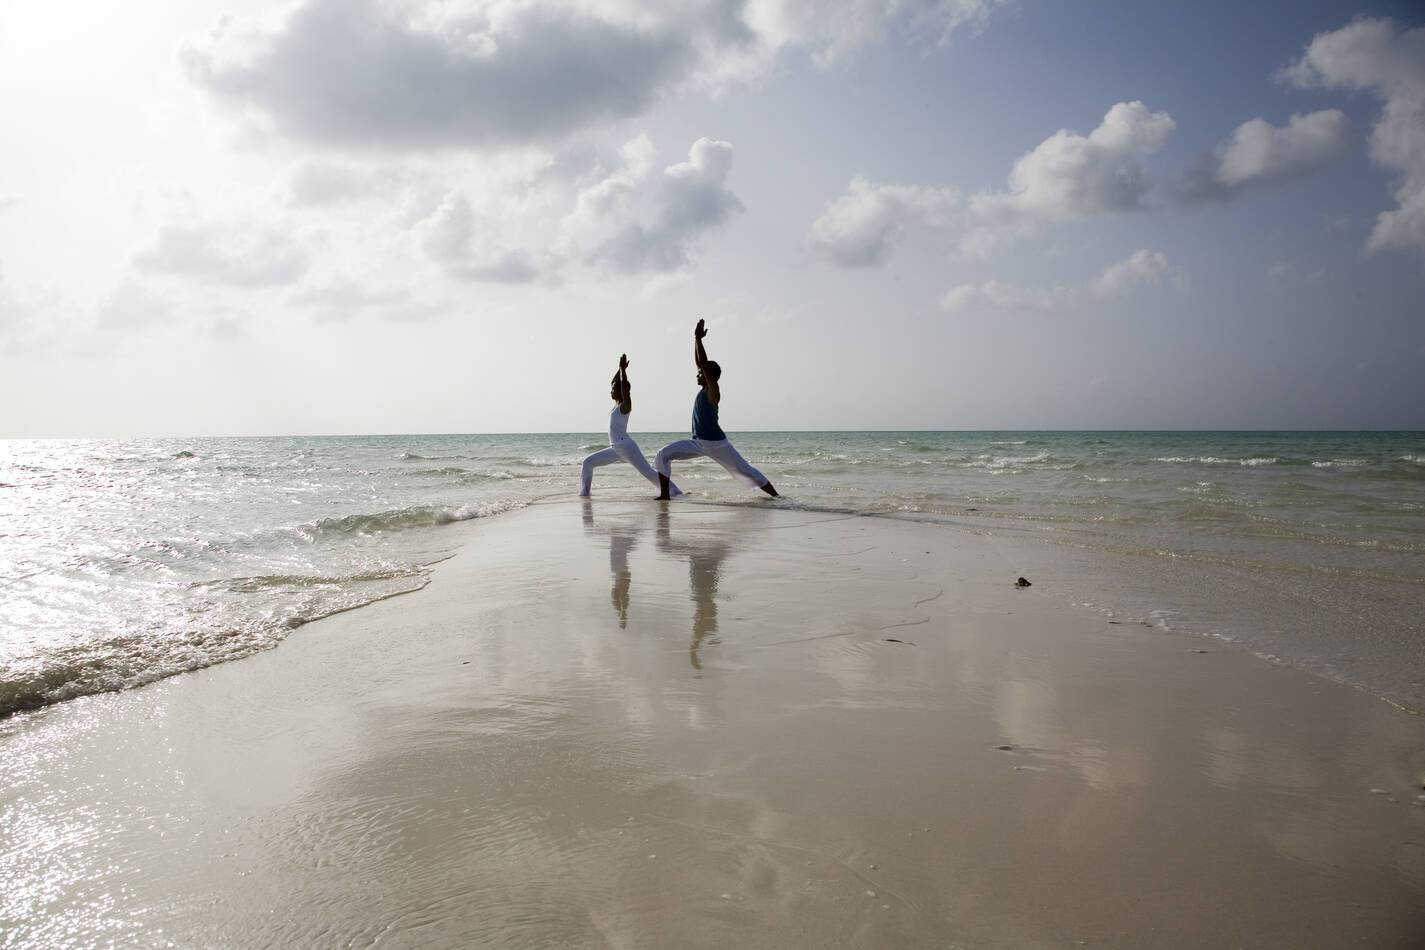 Parrot Cay Turks and Caicos Yoga